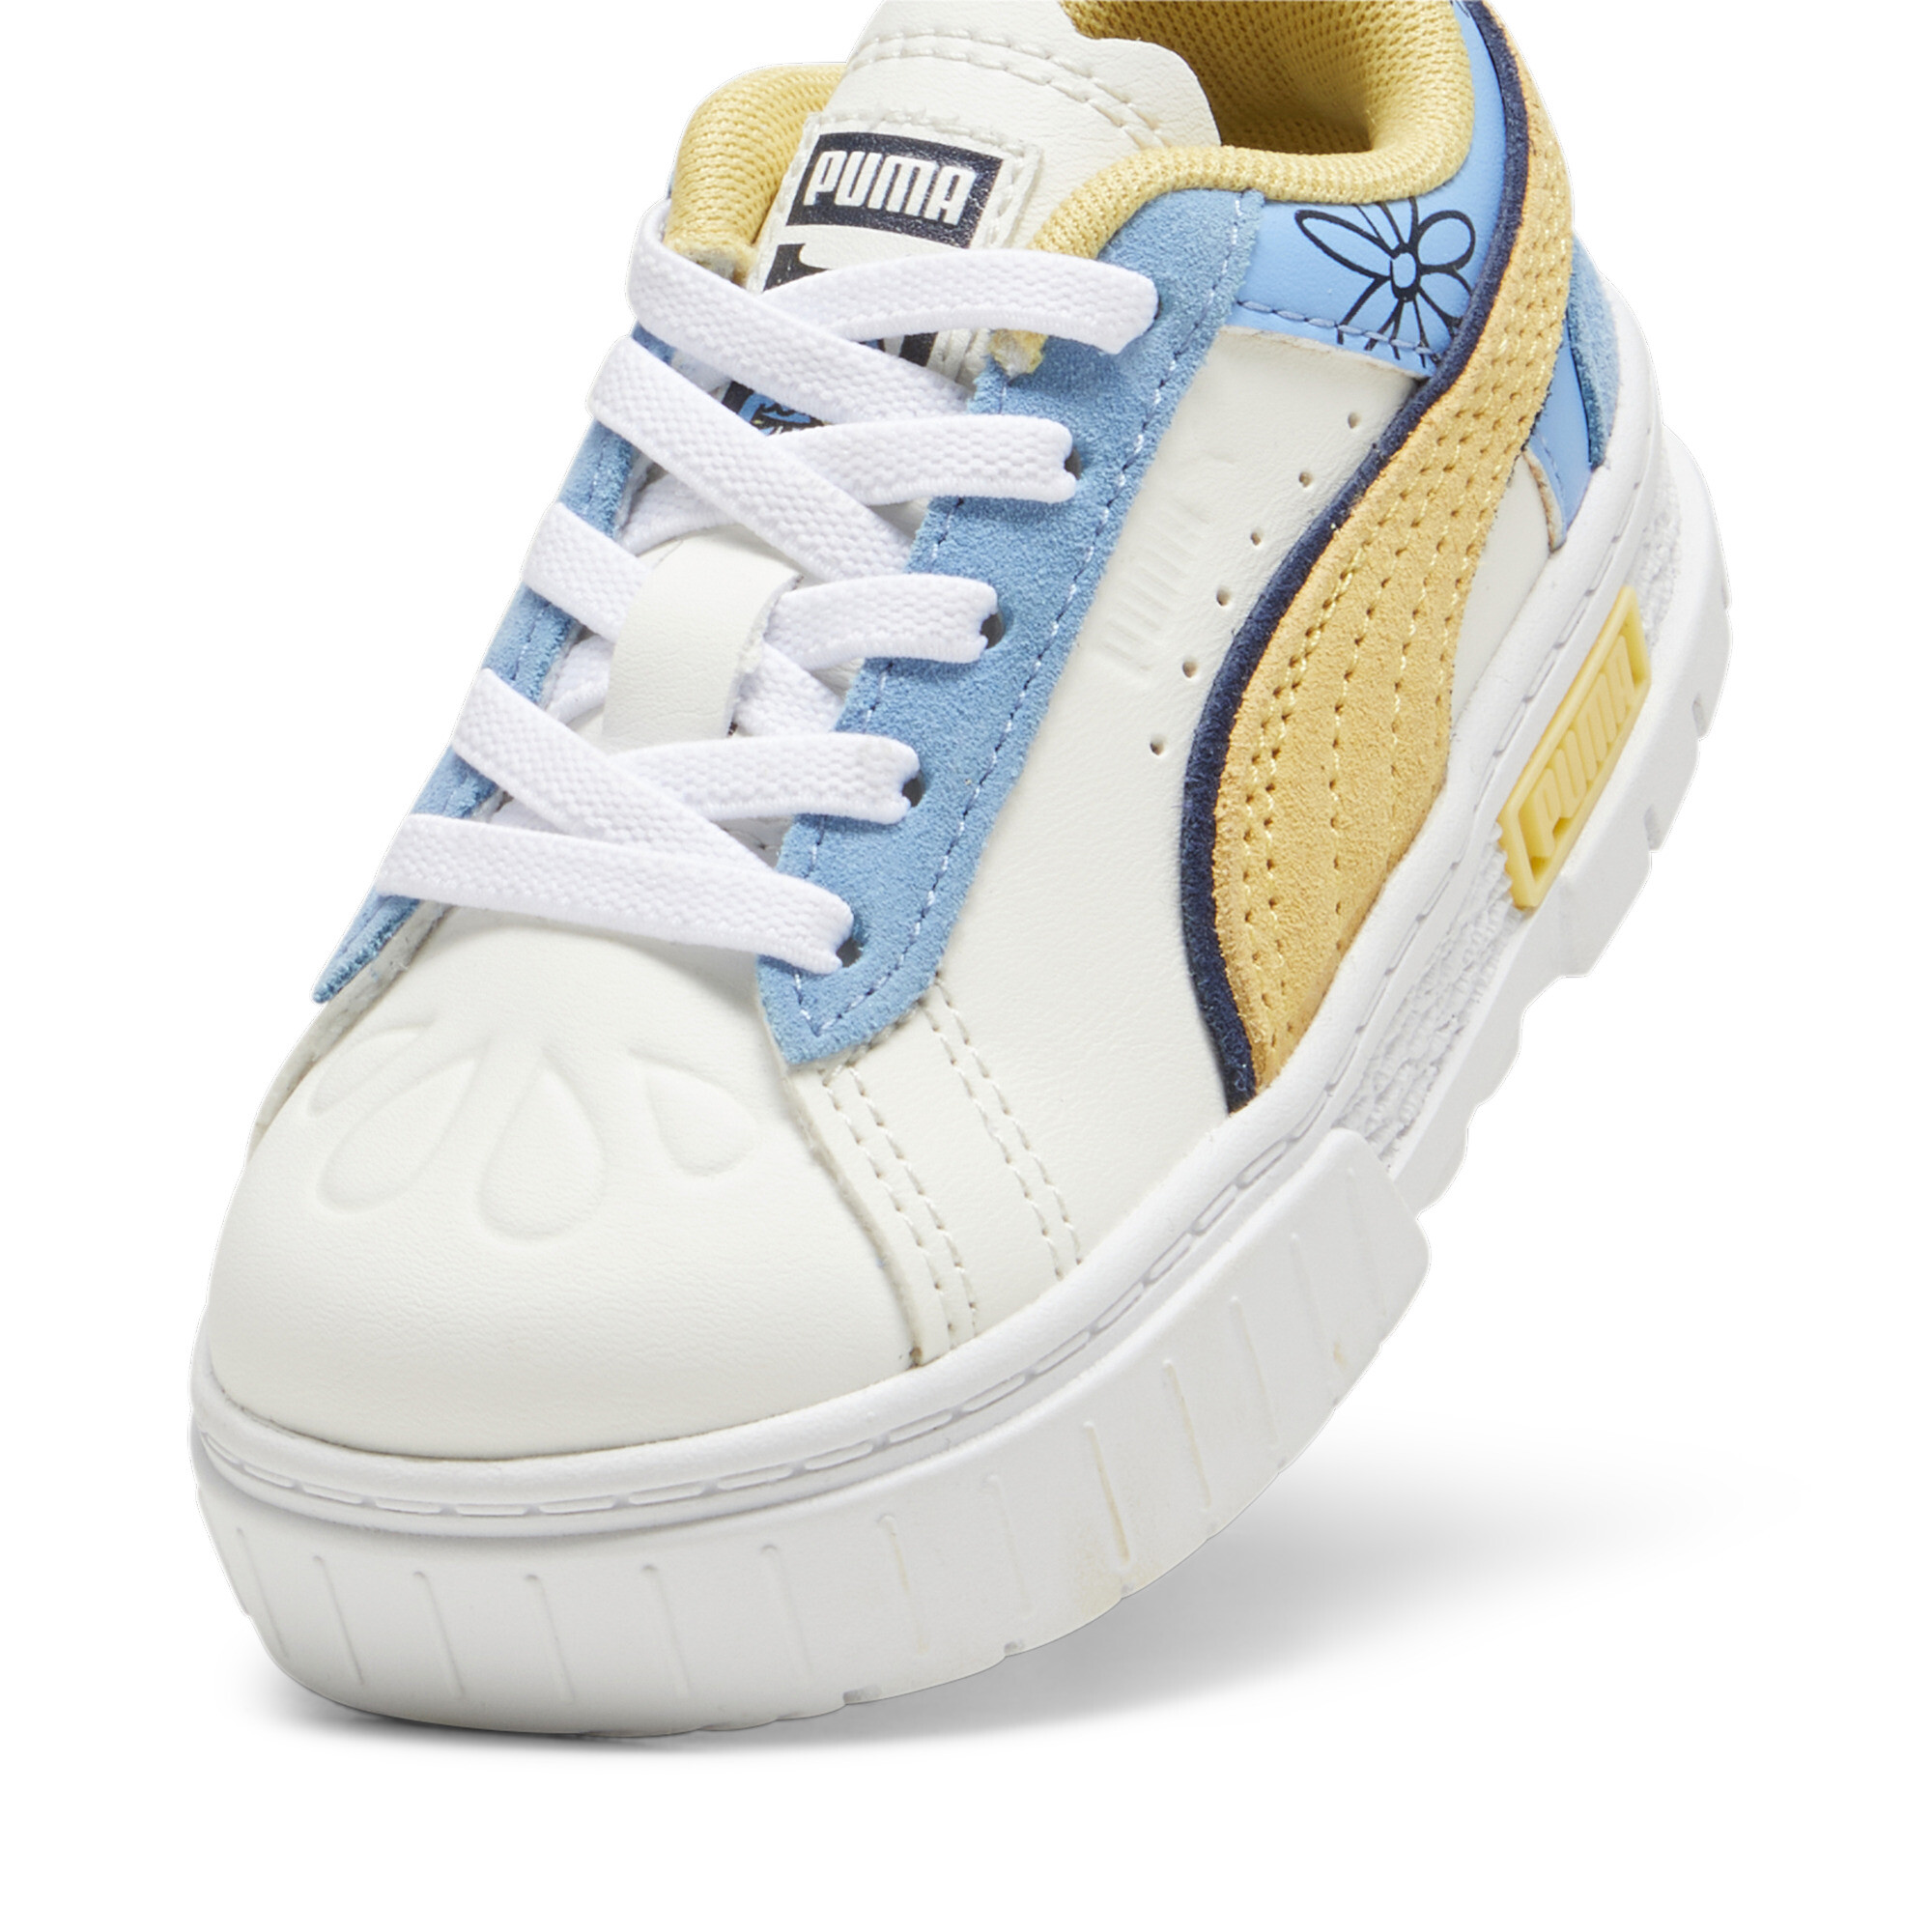 Women's Puma X THE SMURFS Mayze Toddlers' Sneakers, White, Size 20, Shoes